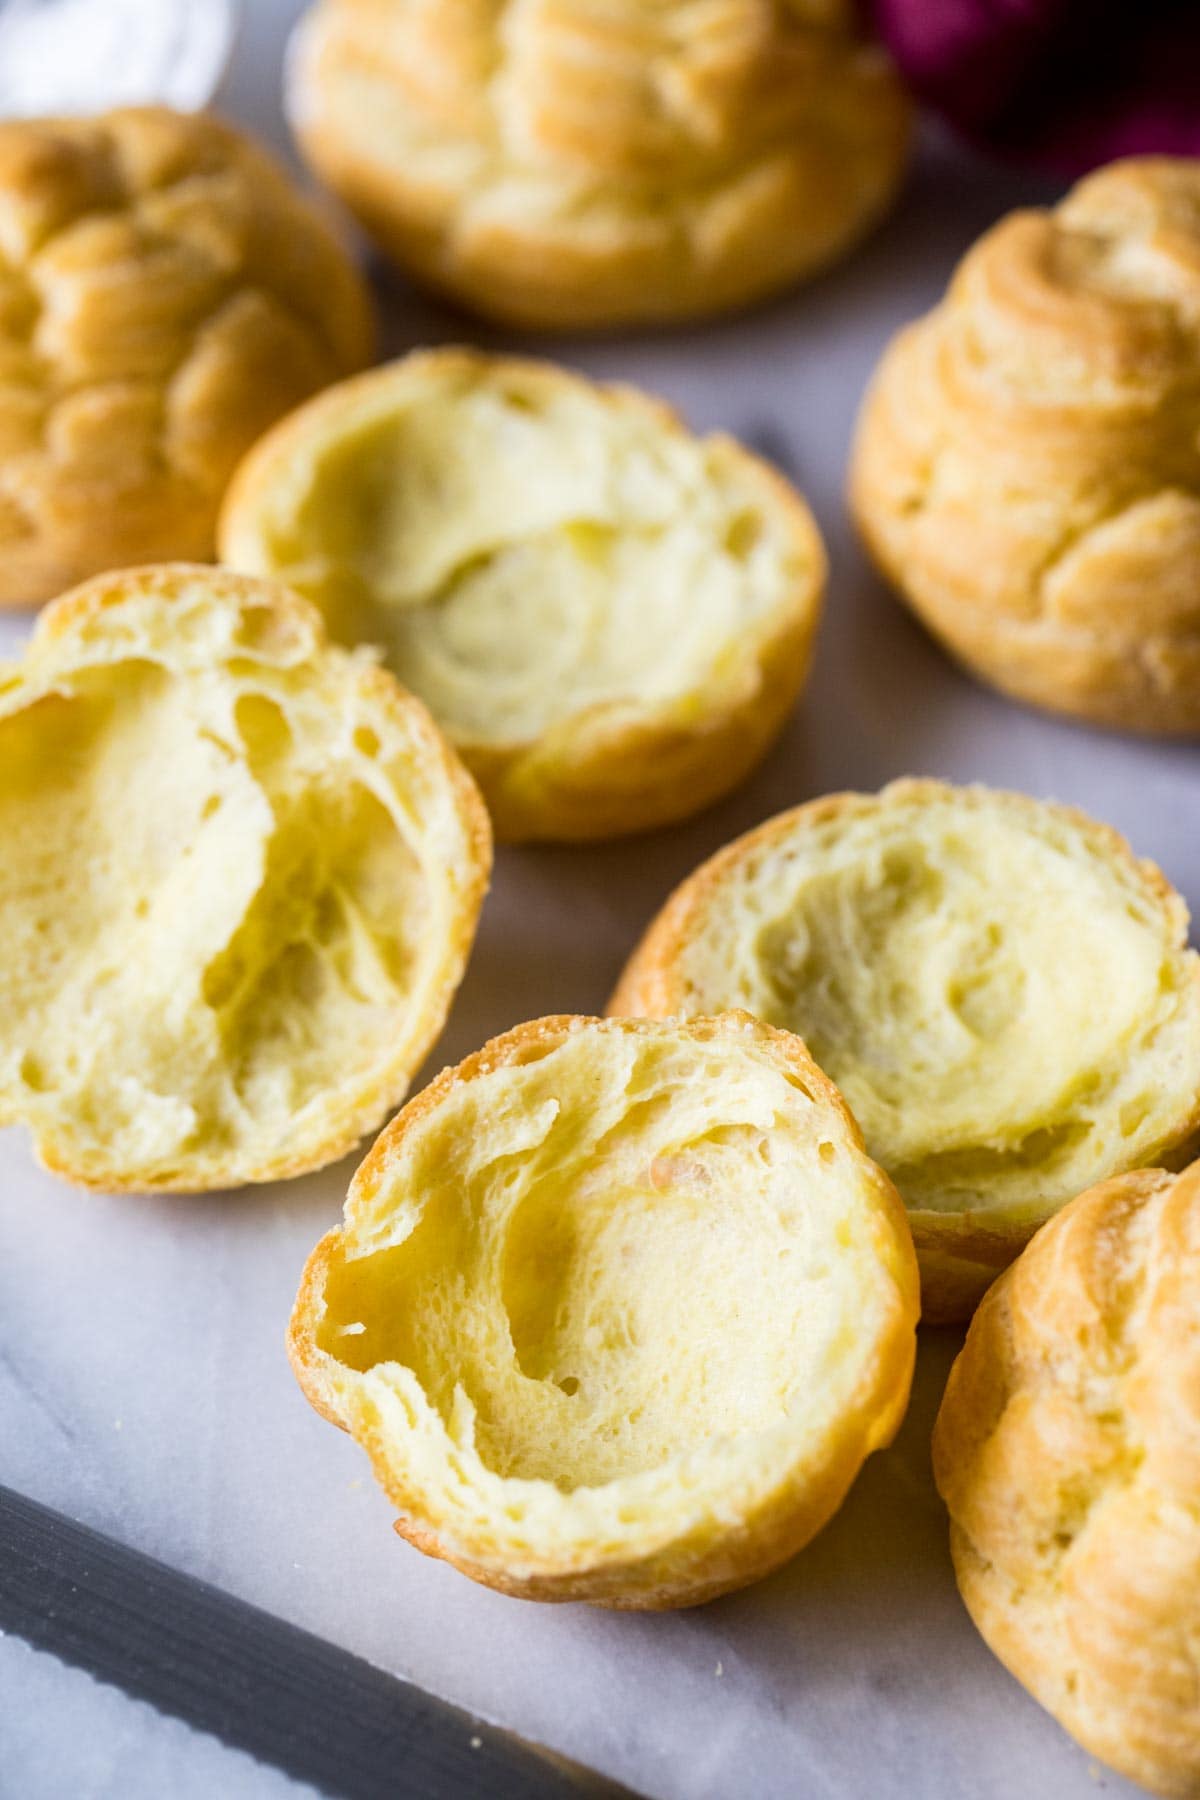 Choux bun halves with rounded, airy interiors.